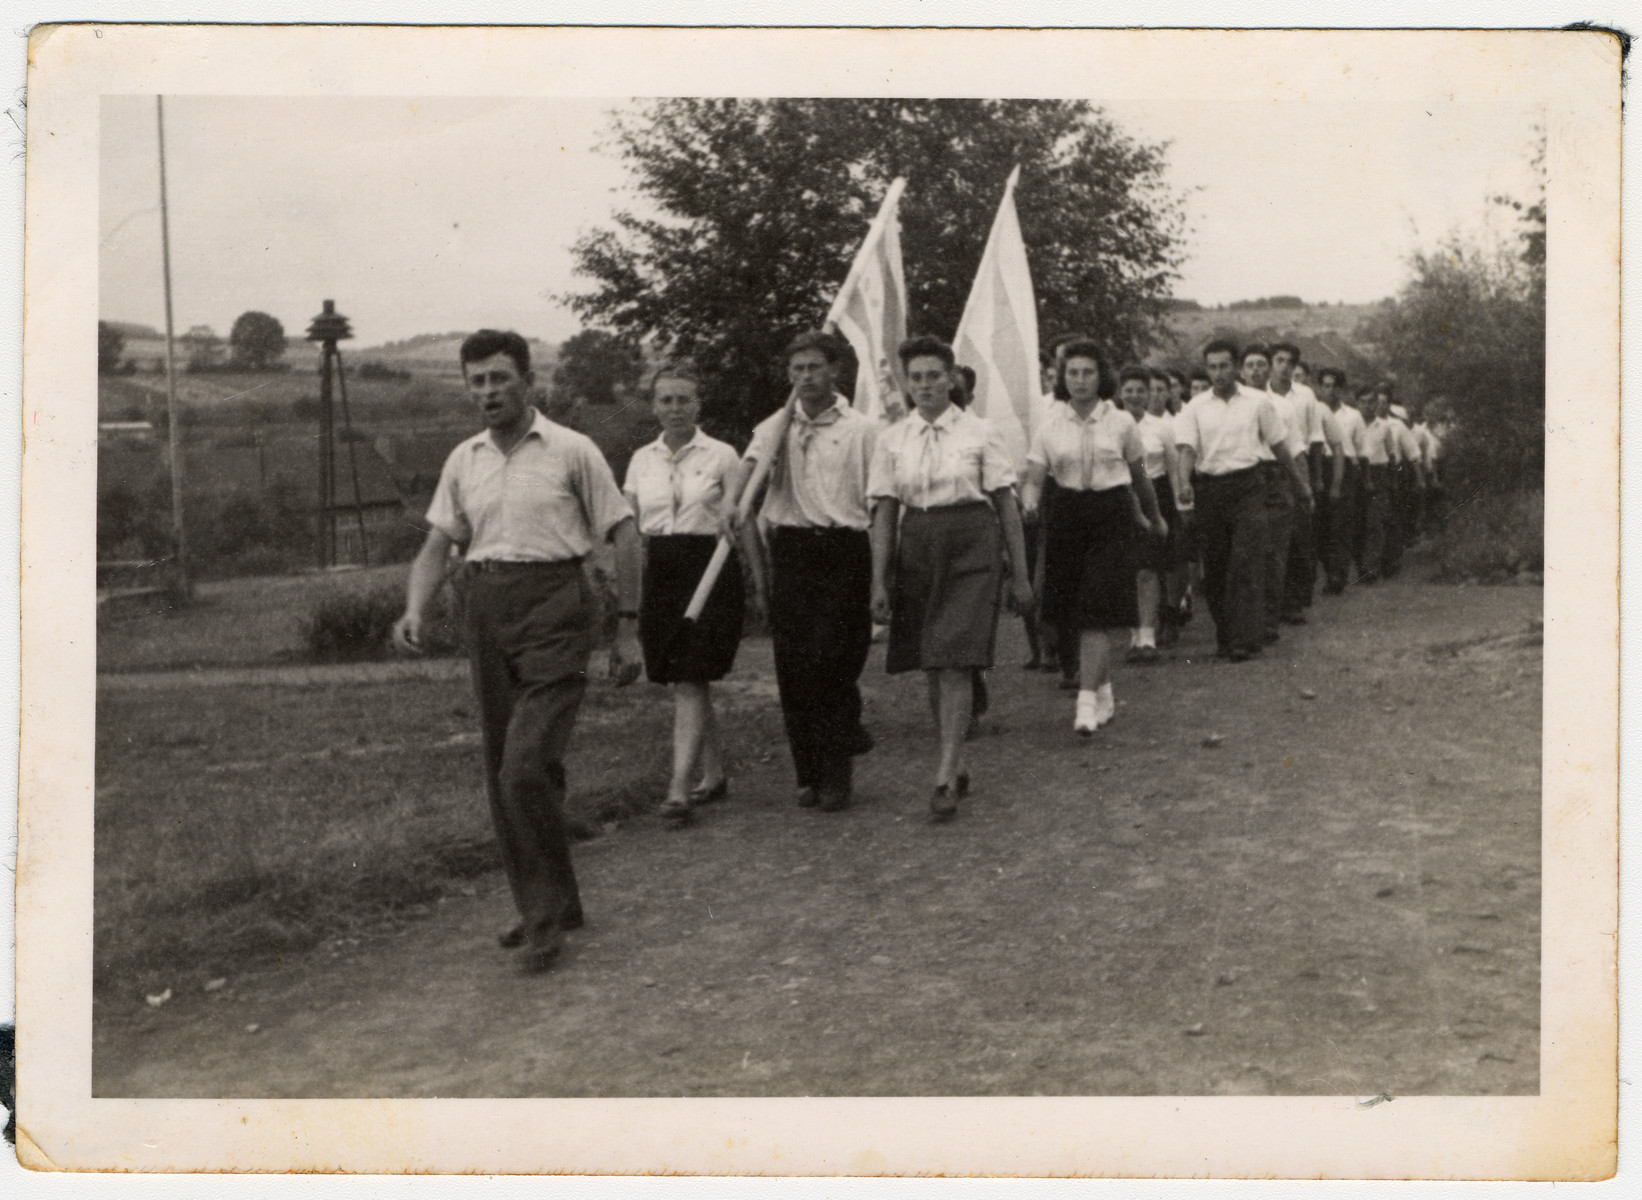 Jewish displaced person's march with a flag in a Zionist demonstration in Hessisch-Lichtenau.

Among those pictured is Sara Wiener.